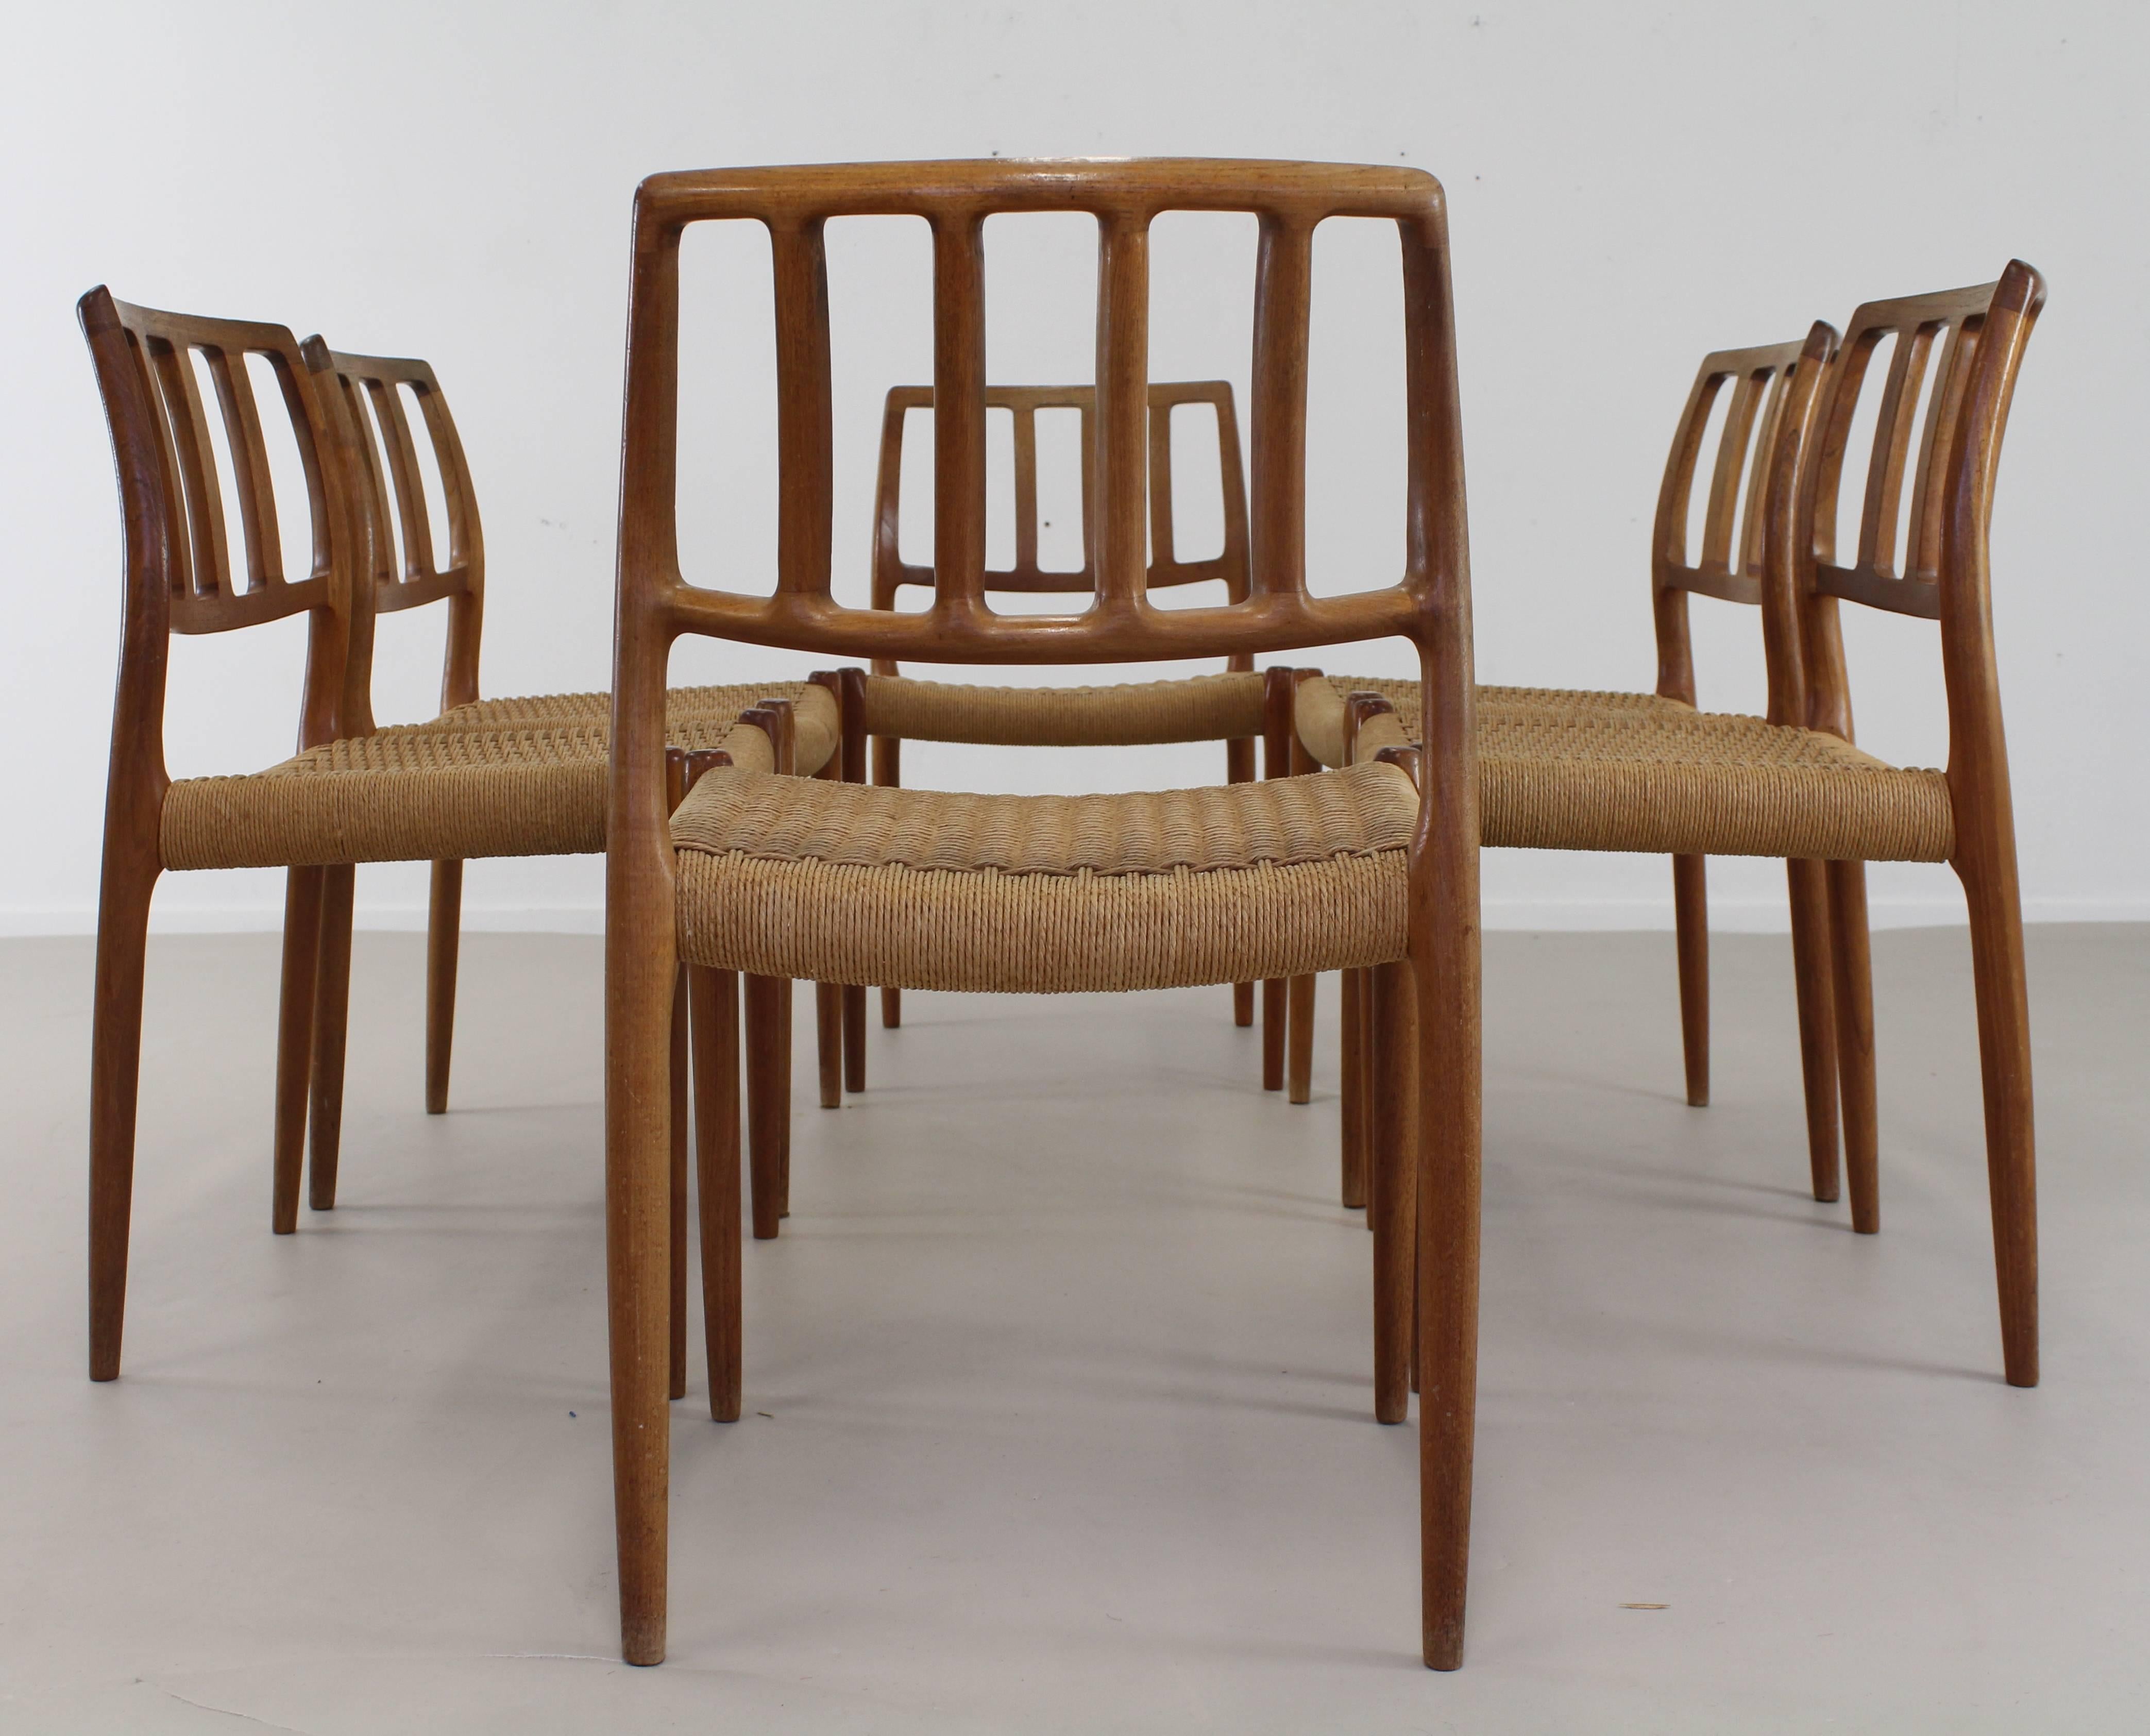 Danish Design Teakwood Dining Chairs by Niels Møller In Excellent Condition For Sale In Staphorst, NL